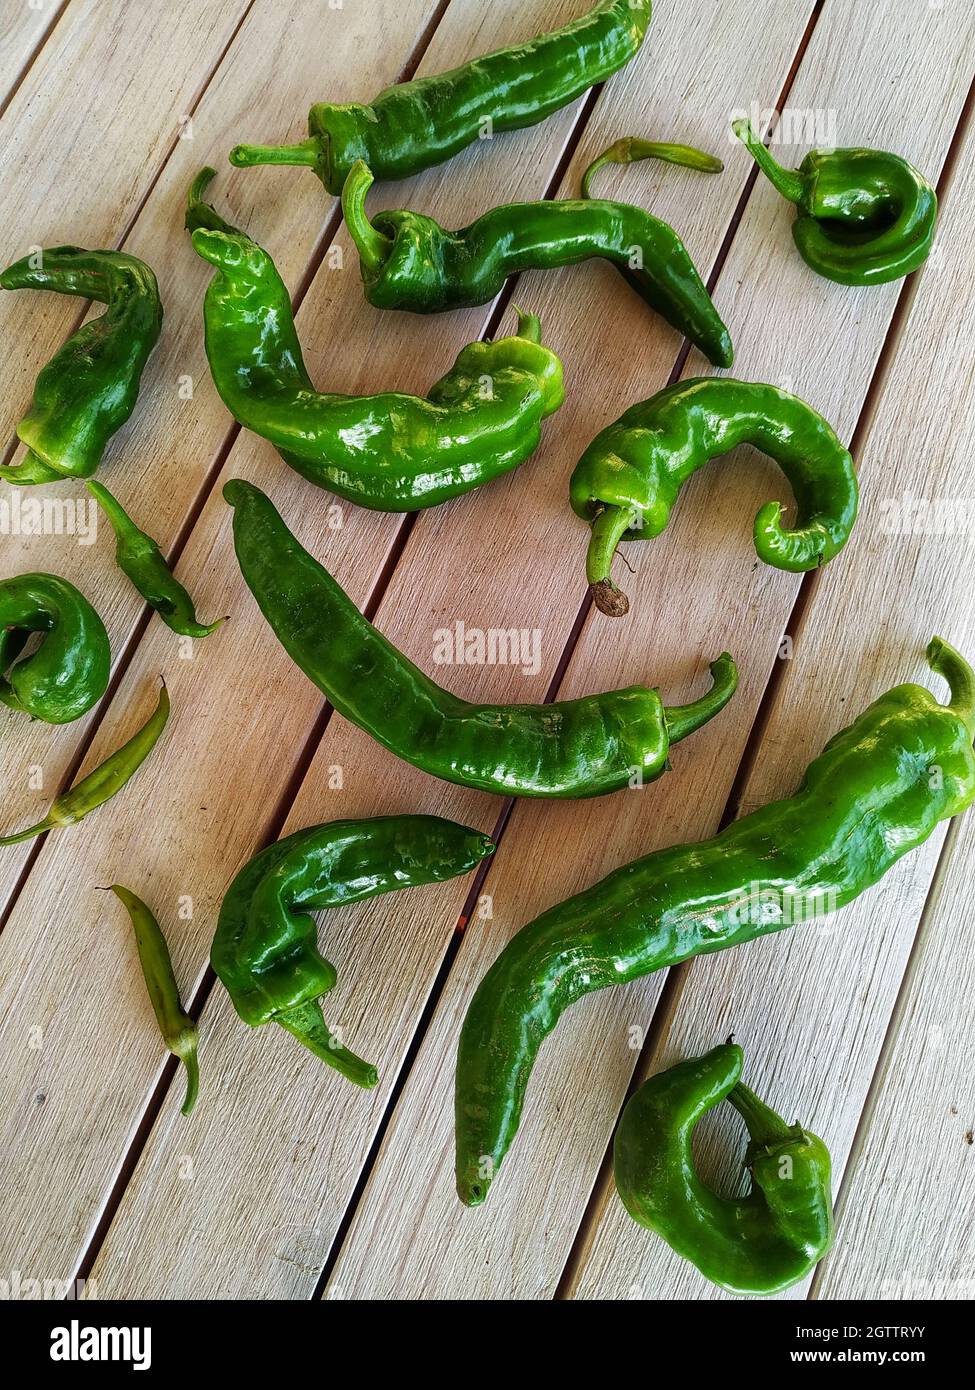 High Angle View Of Chili Pepper On Table Stock Photo